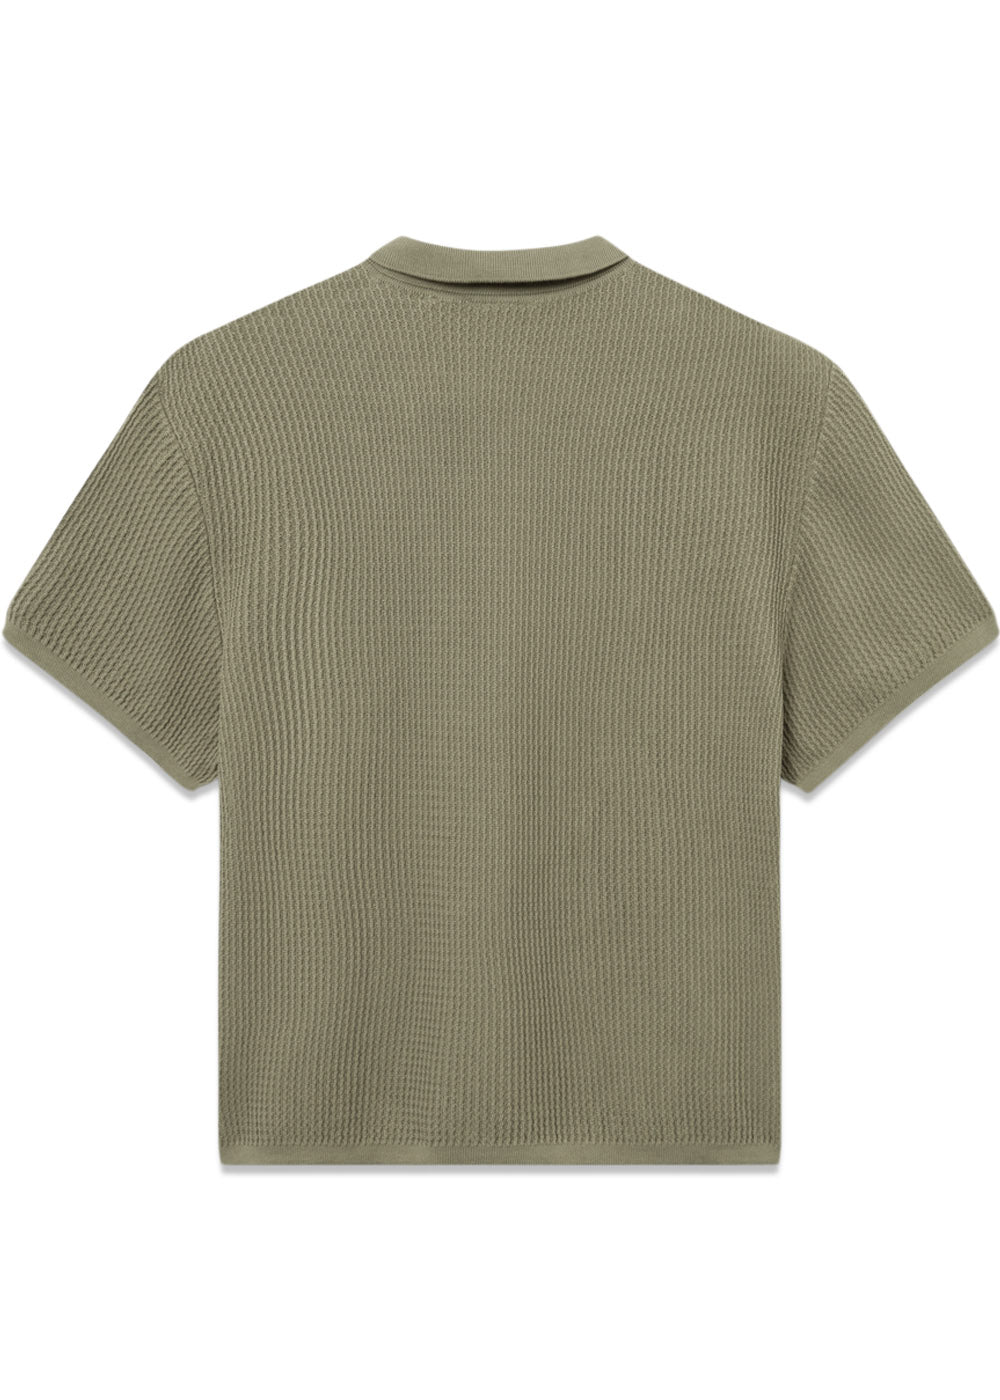 MOMENT HALF ZIP KNIT - Dusty Olive